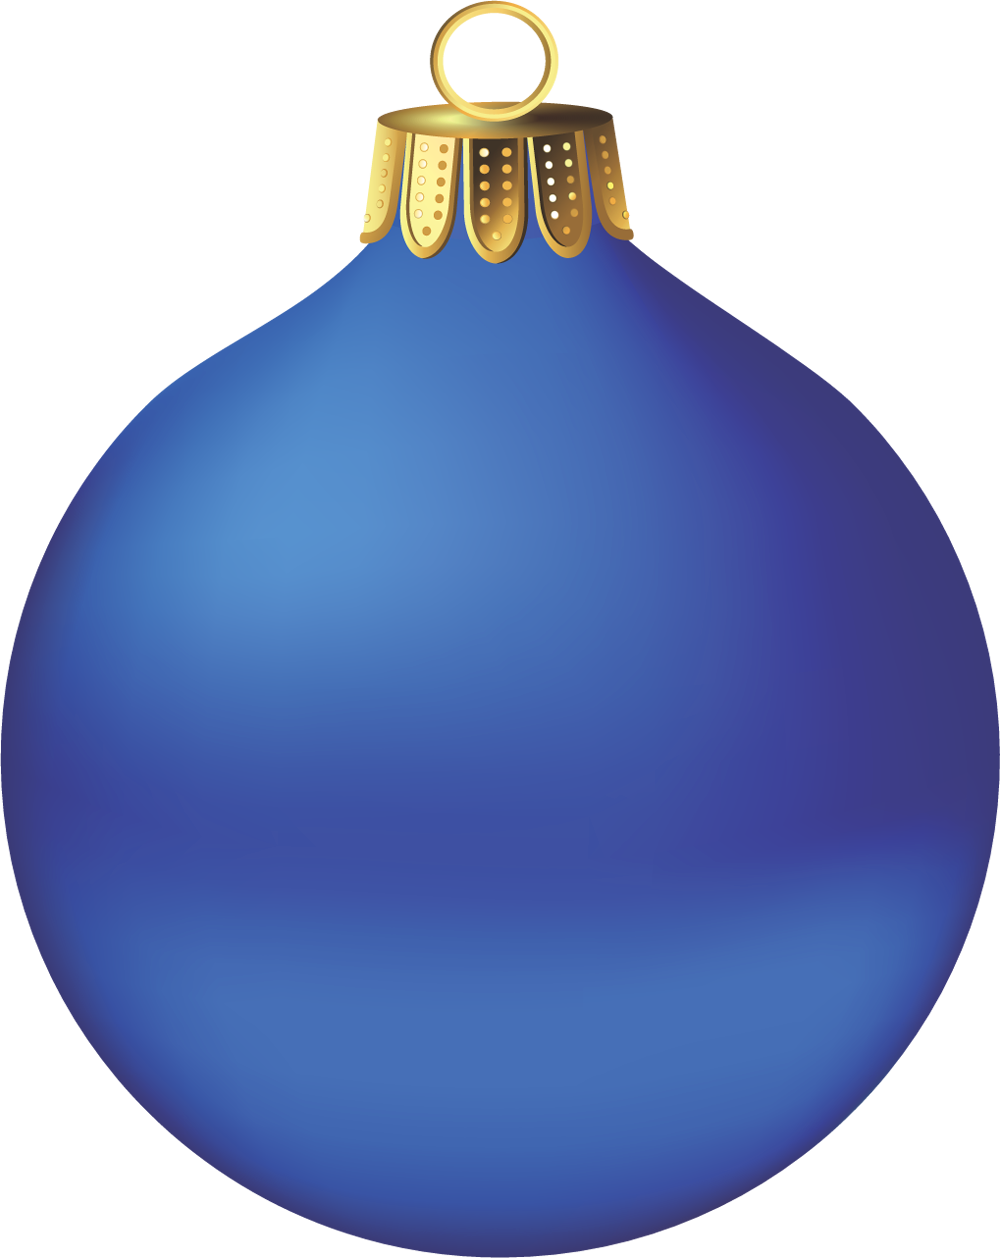 Xmas Stuff For > Christmas Ornaments Hanging Png